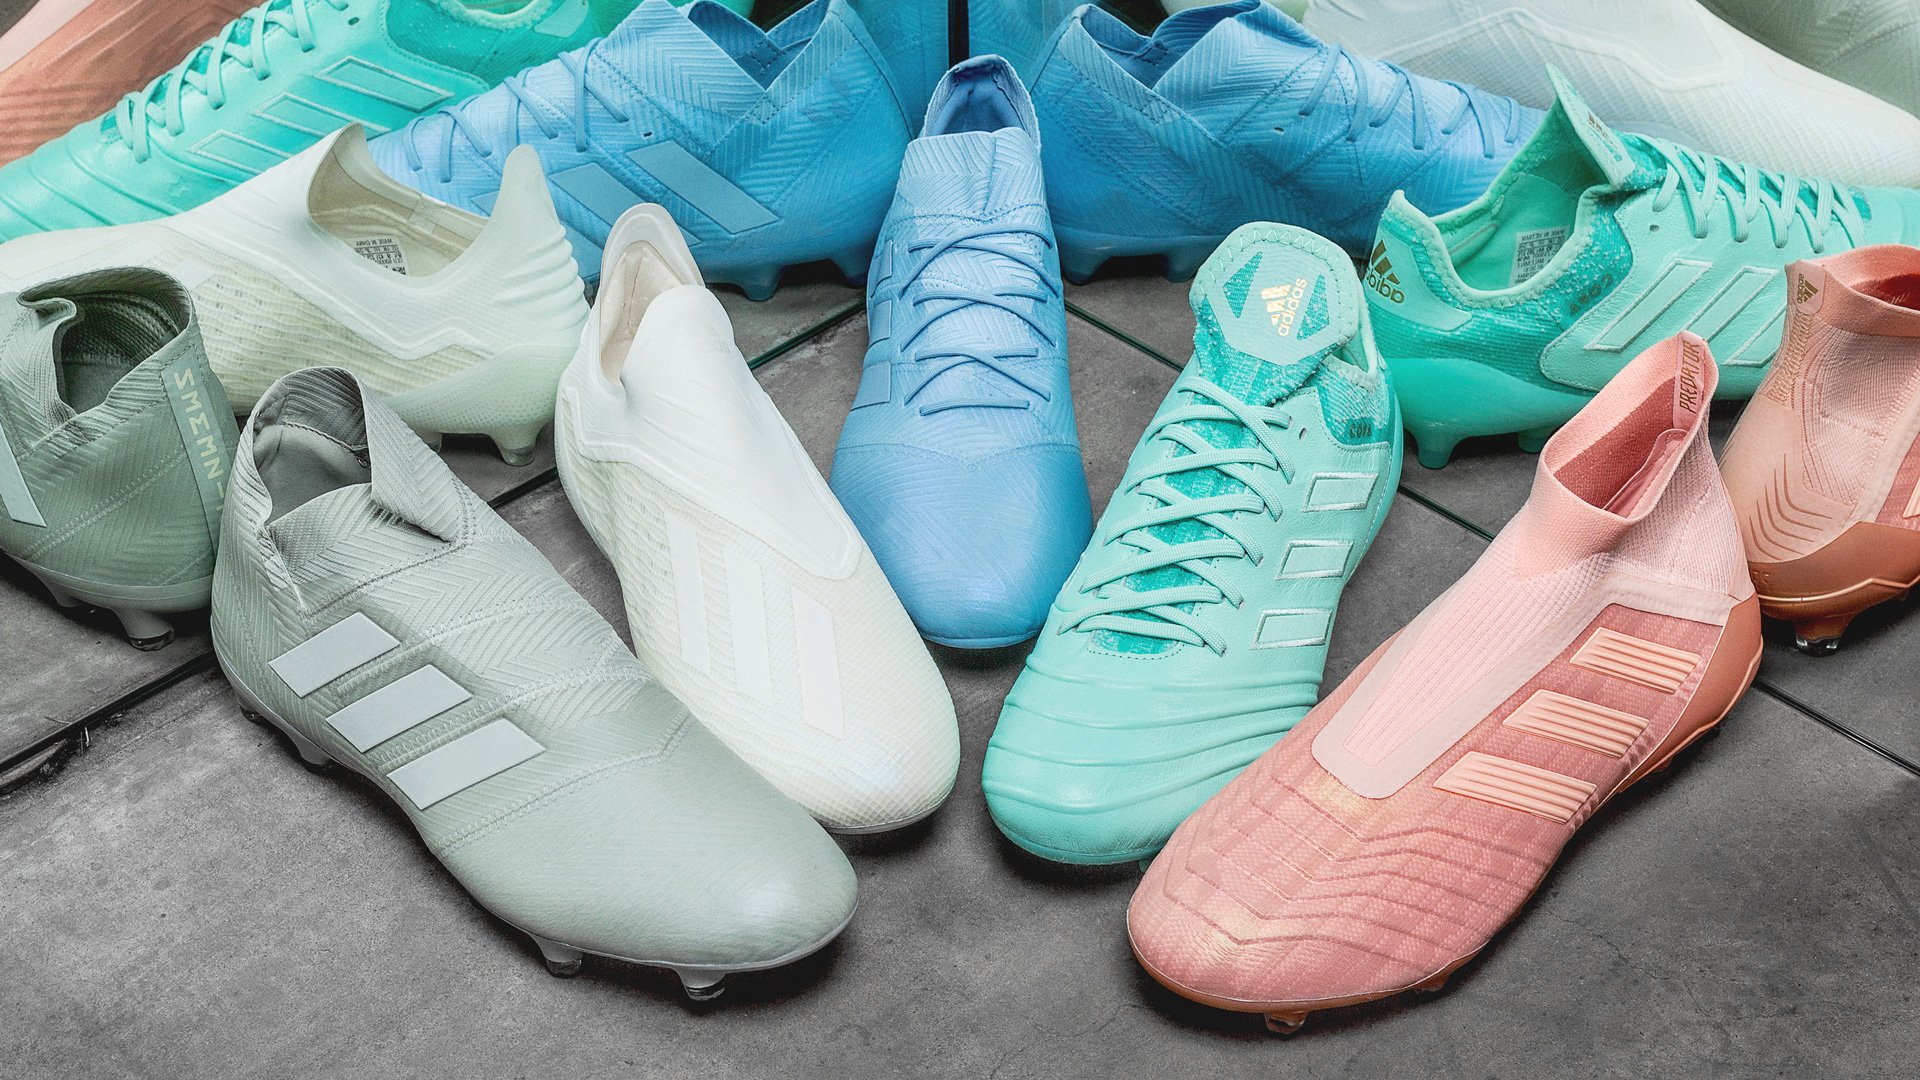 entusiasta petrolero Accesible adidas presents Spectral Mode Pack | Read more at Unisport 